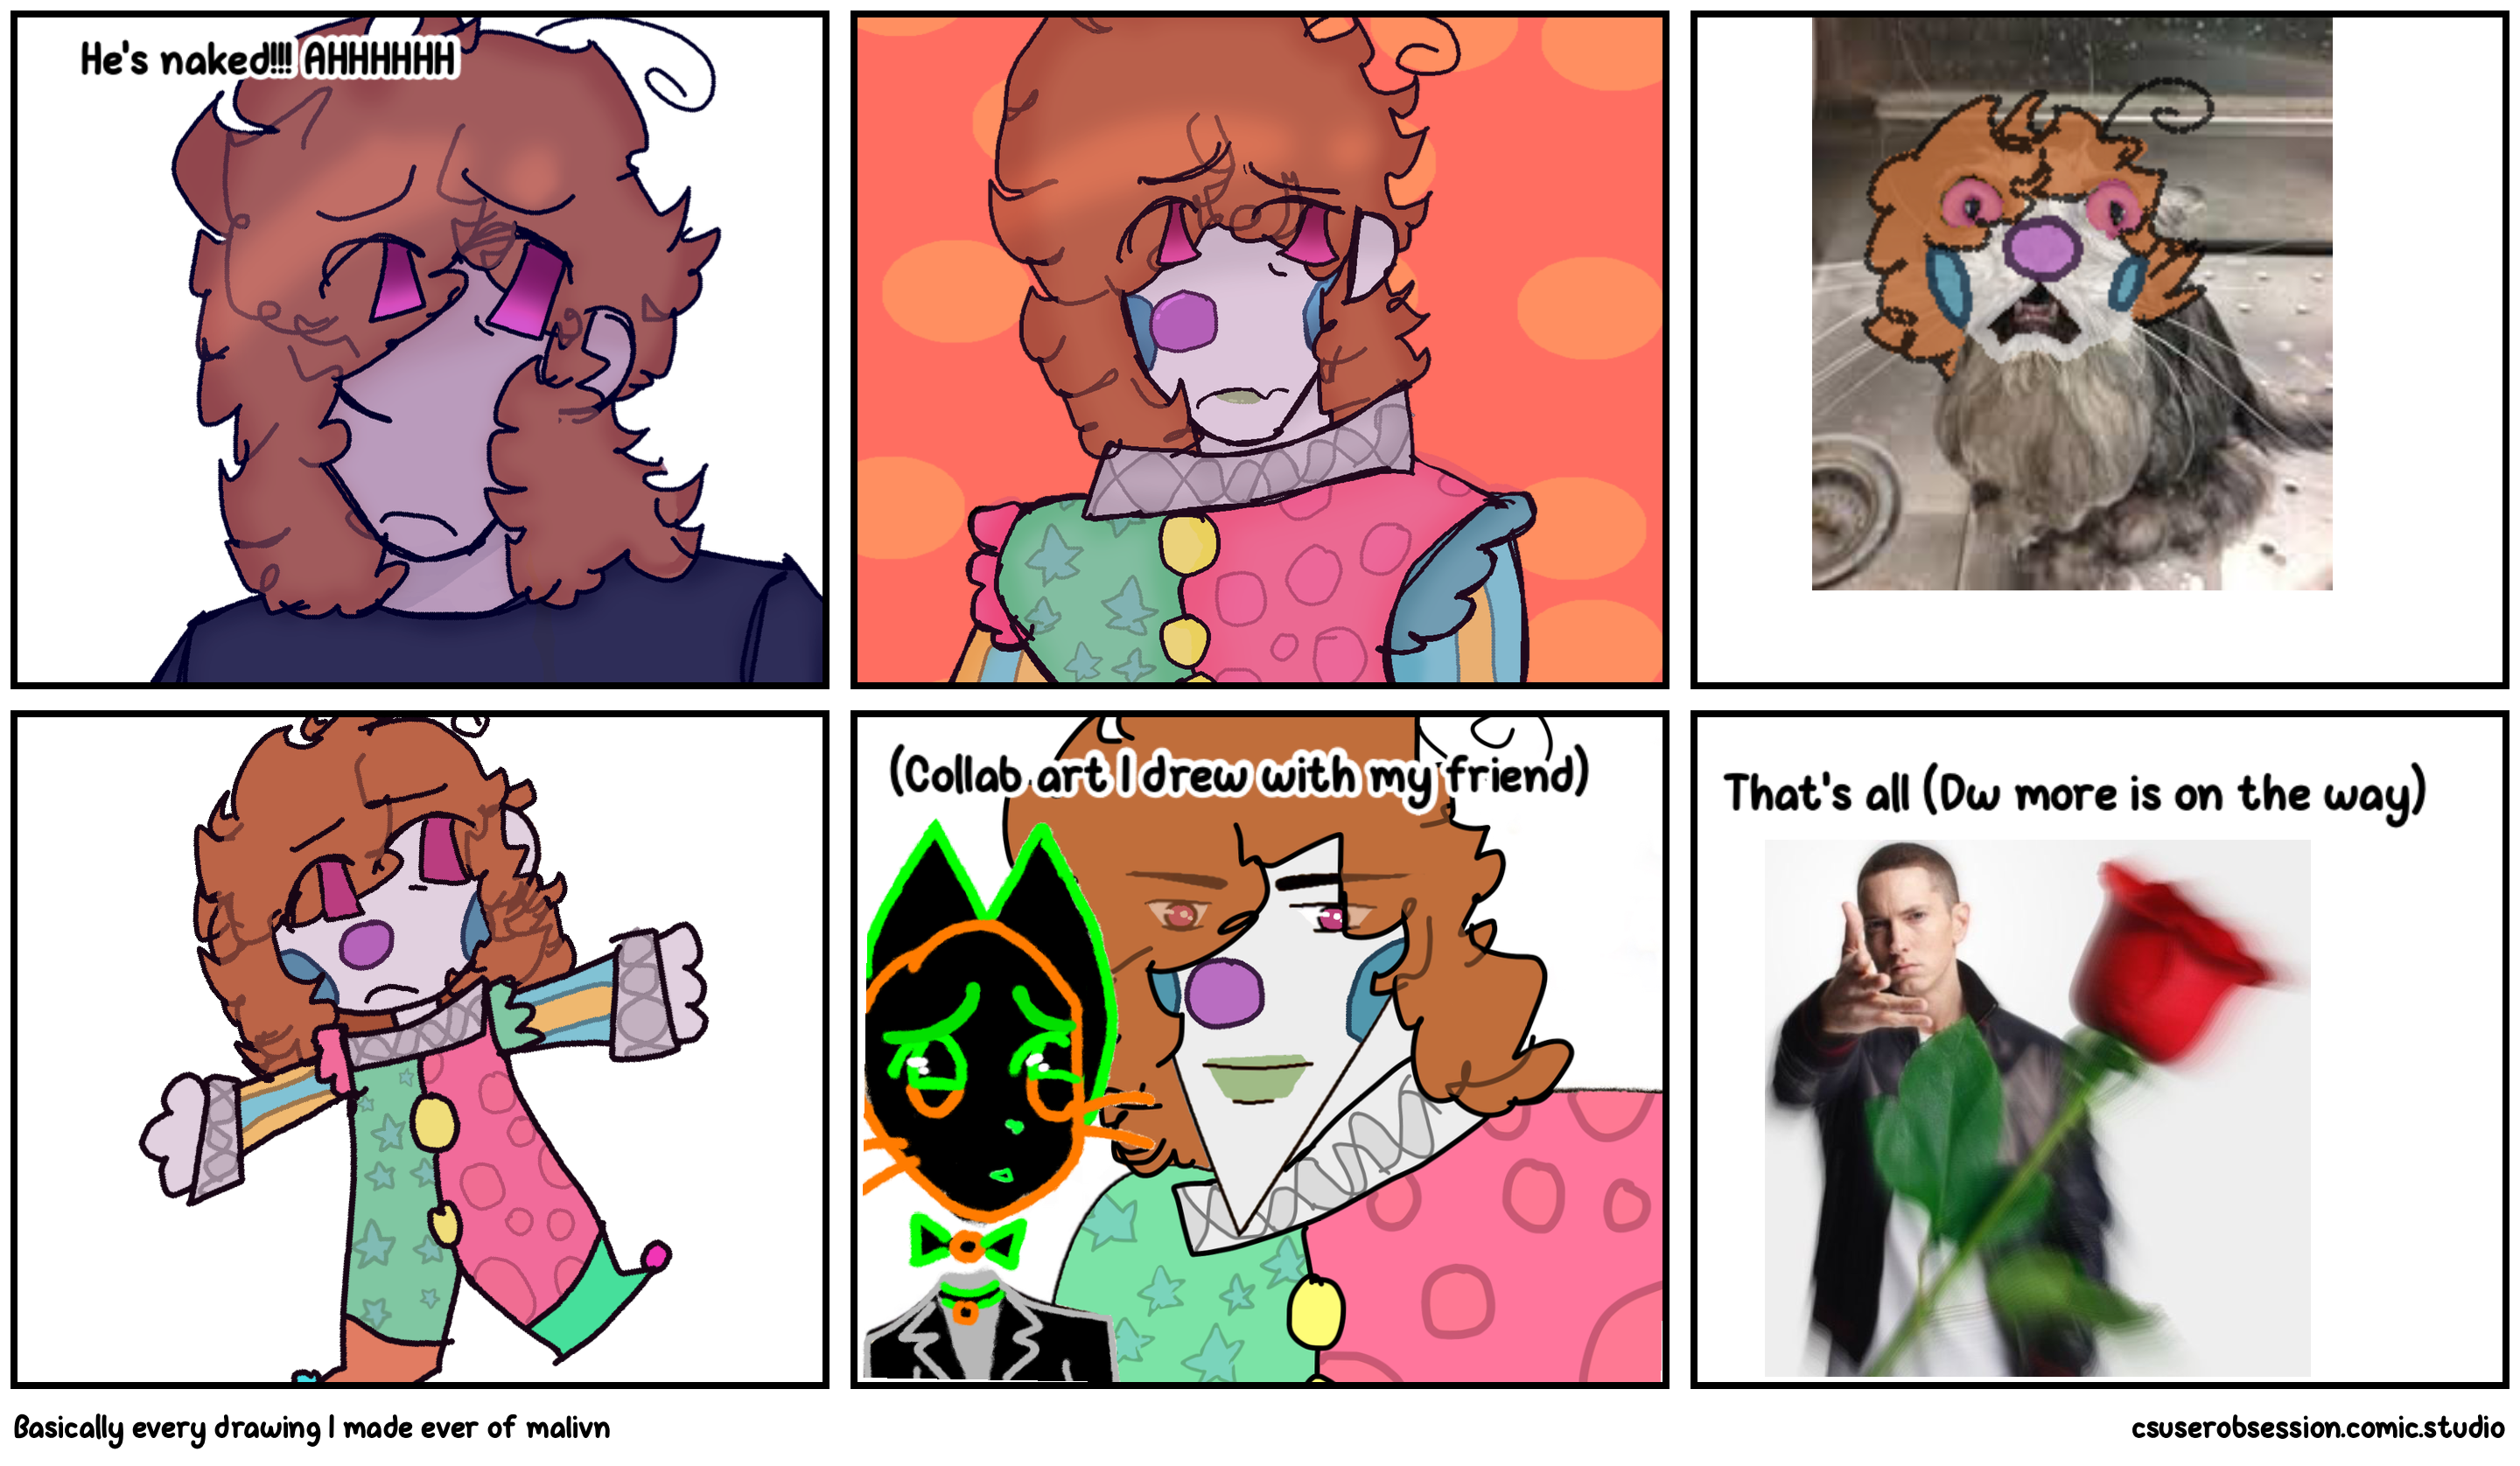 Basically every drawing I made ever of malivn